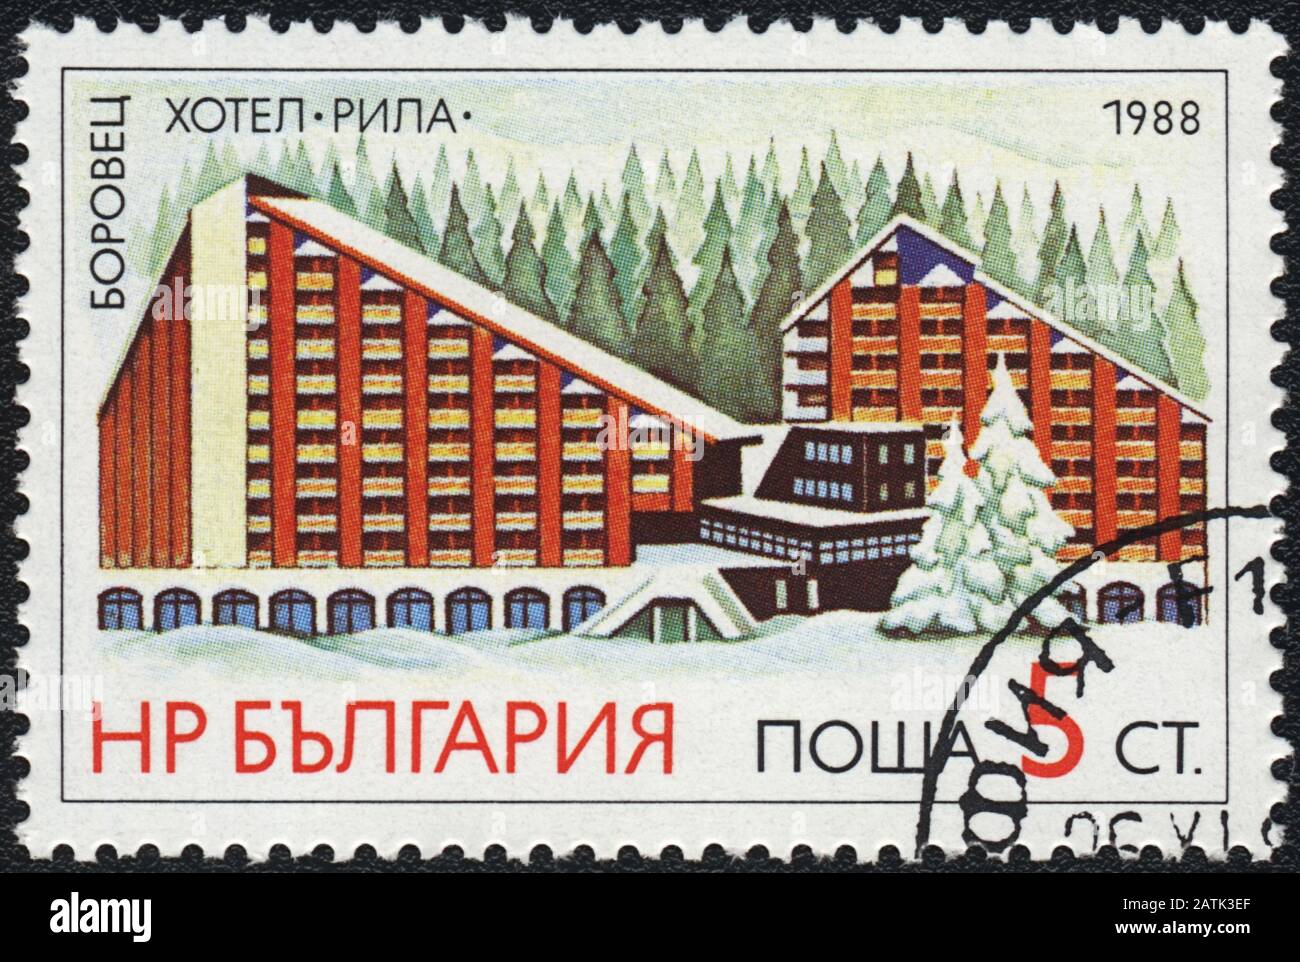 Postage stamp: Rila Hotel Borovets in a pine forest at the foot of the peak of Musala, Bulgaria 1988 Stock Photo